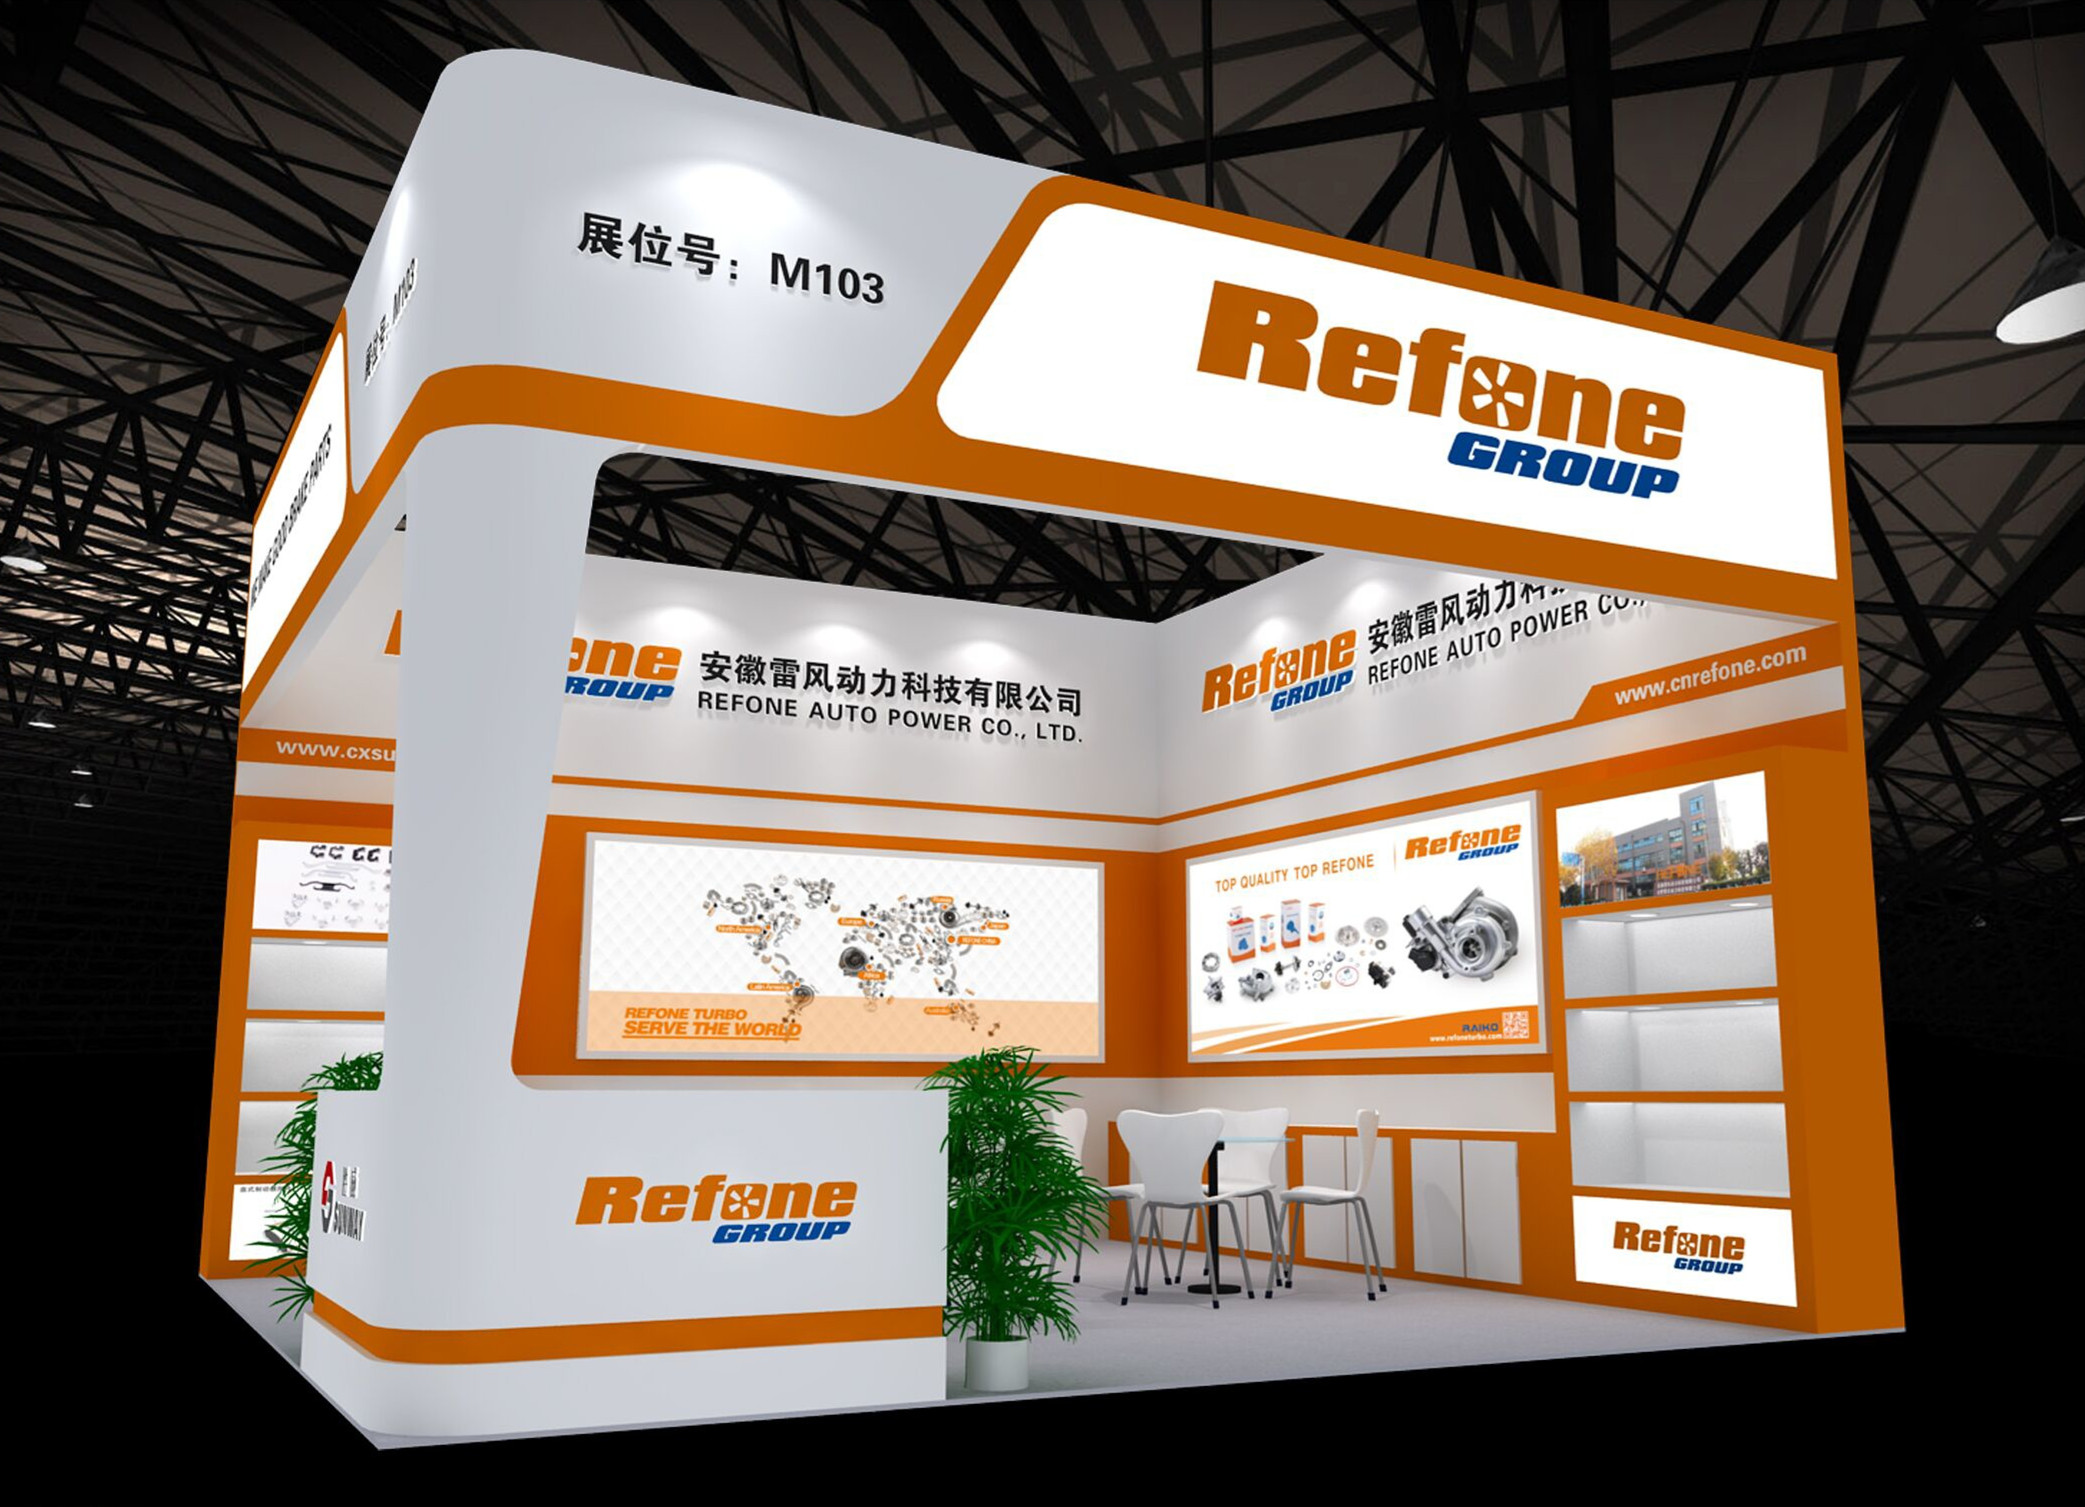 Refone Group Limited will attend automechanika SHANGHAI 2019